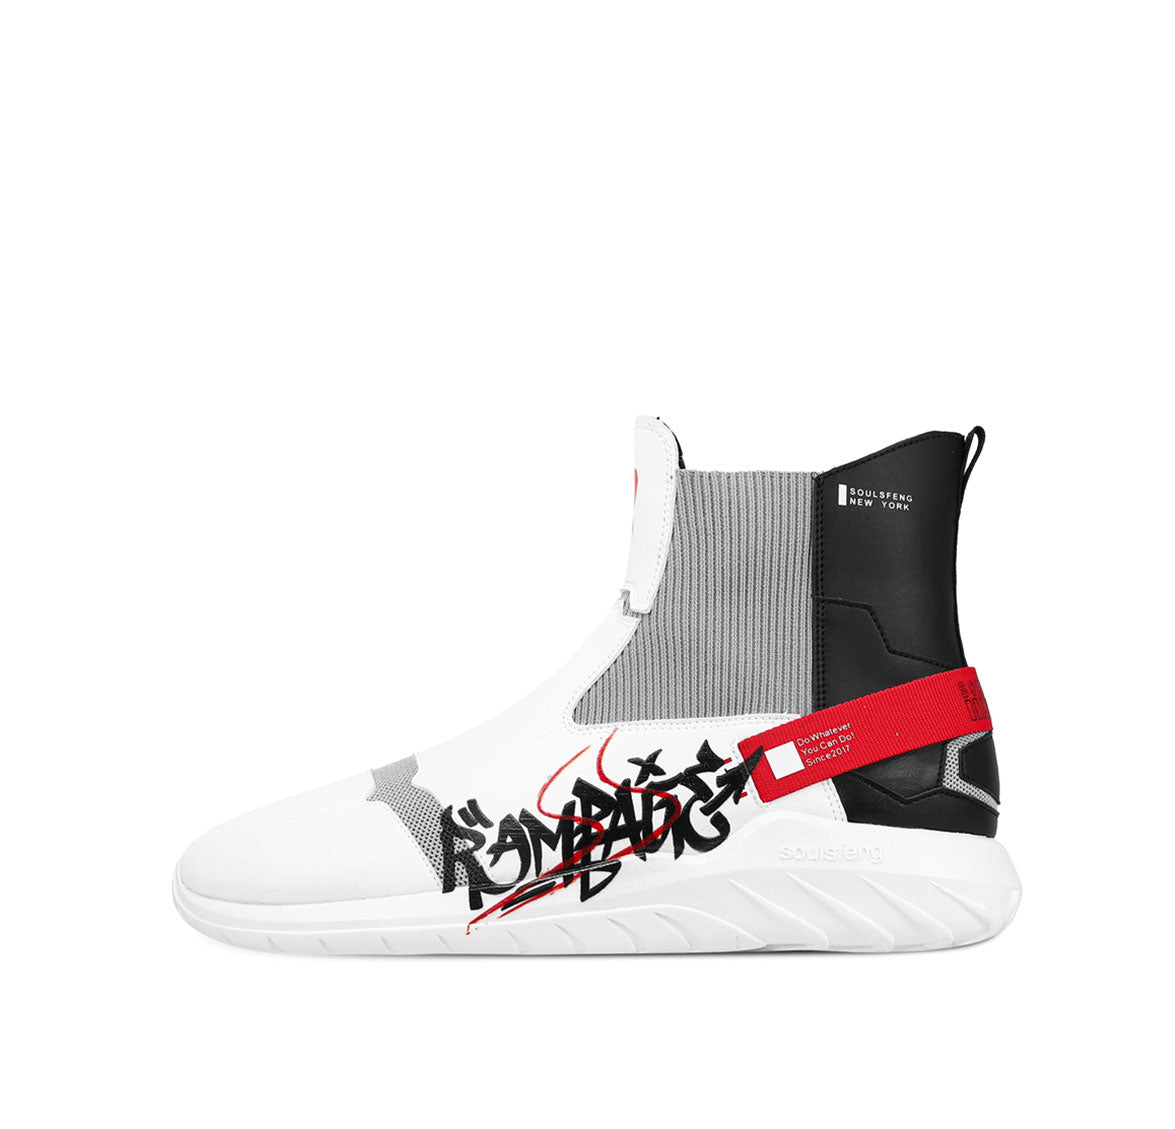 Soulsfeng X Rampage Rated R  R.1’s One Step For Man Sneaker - Soulsfeng